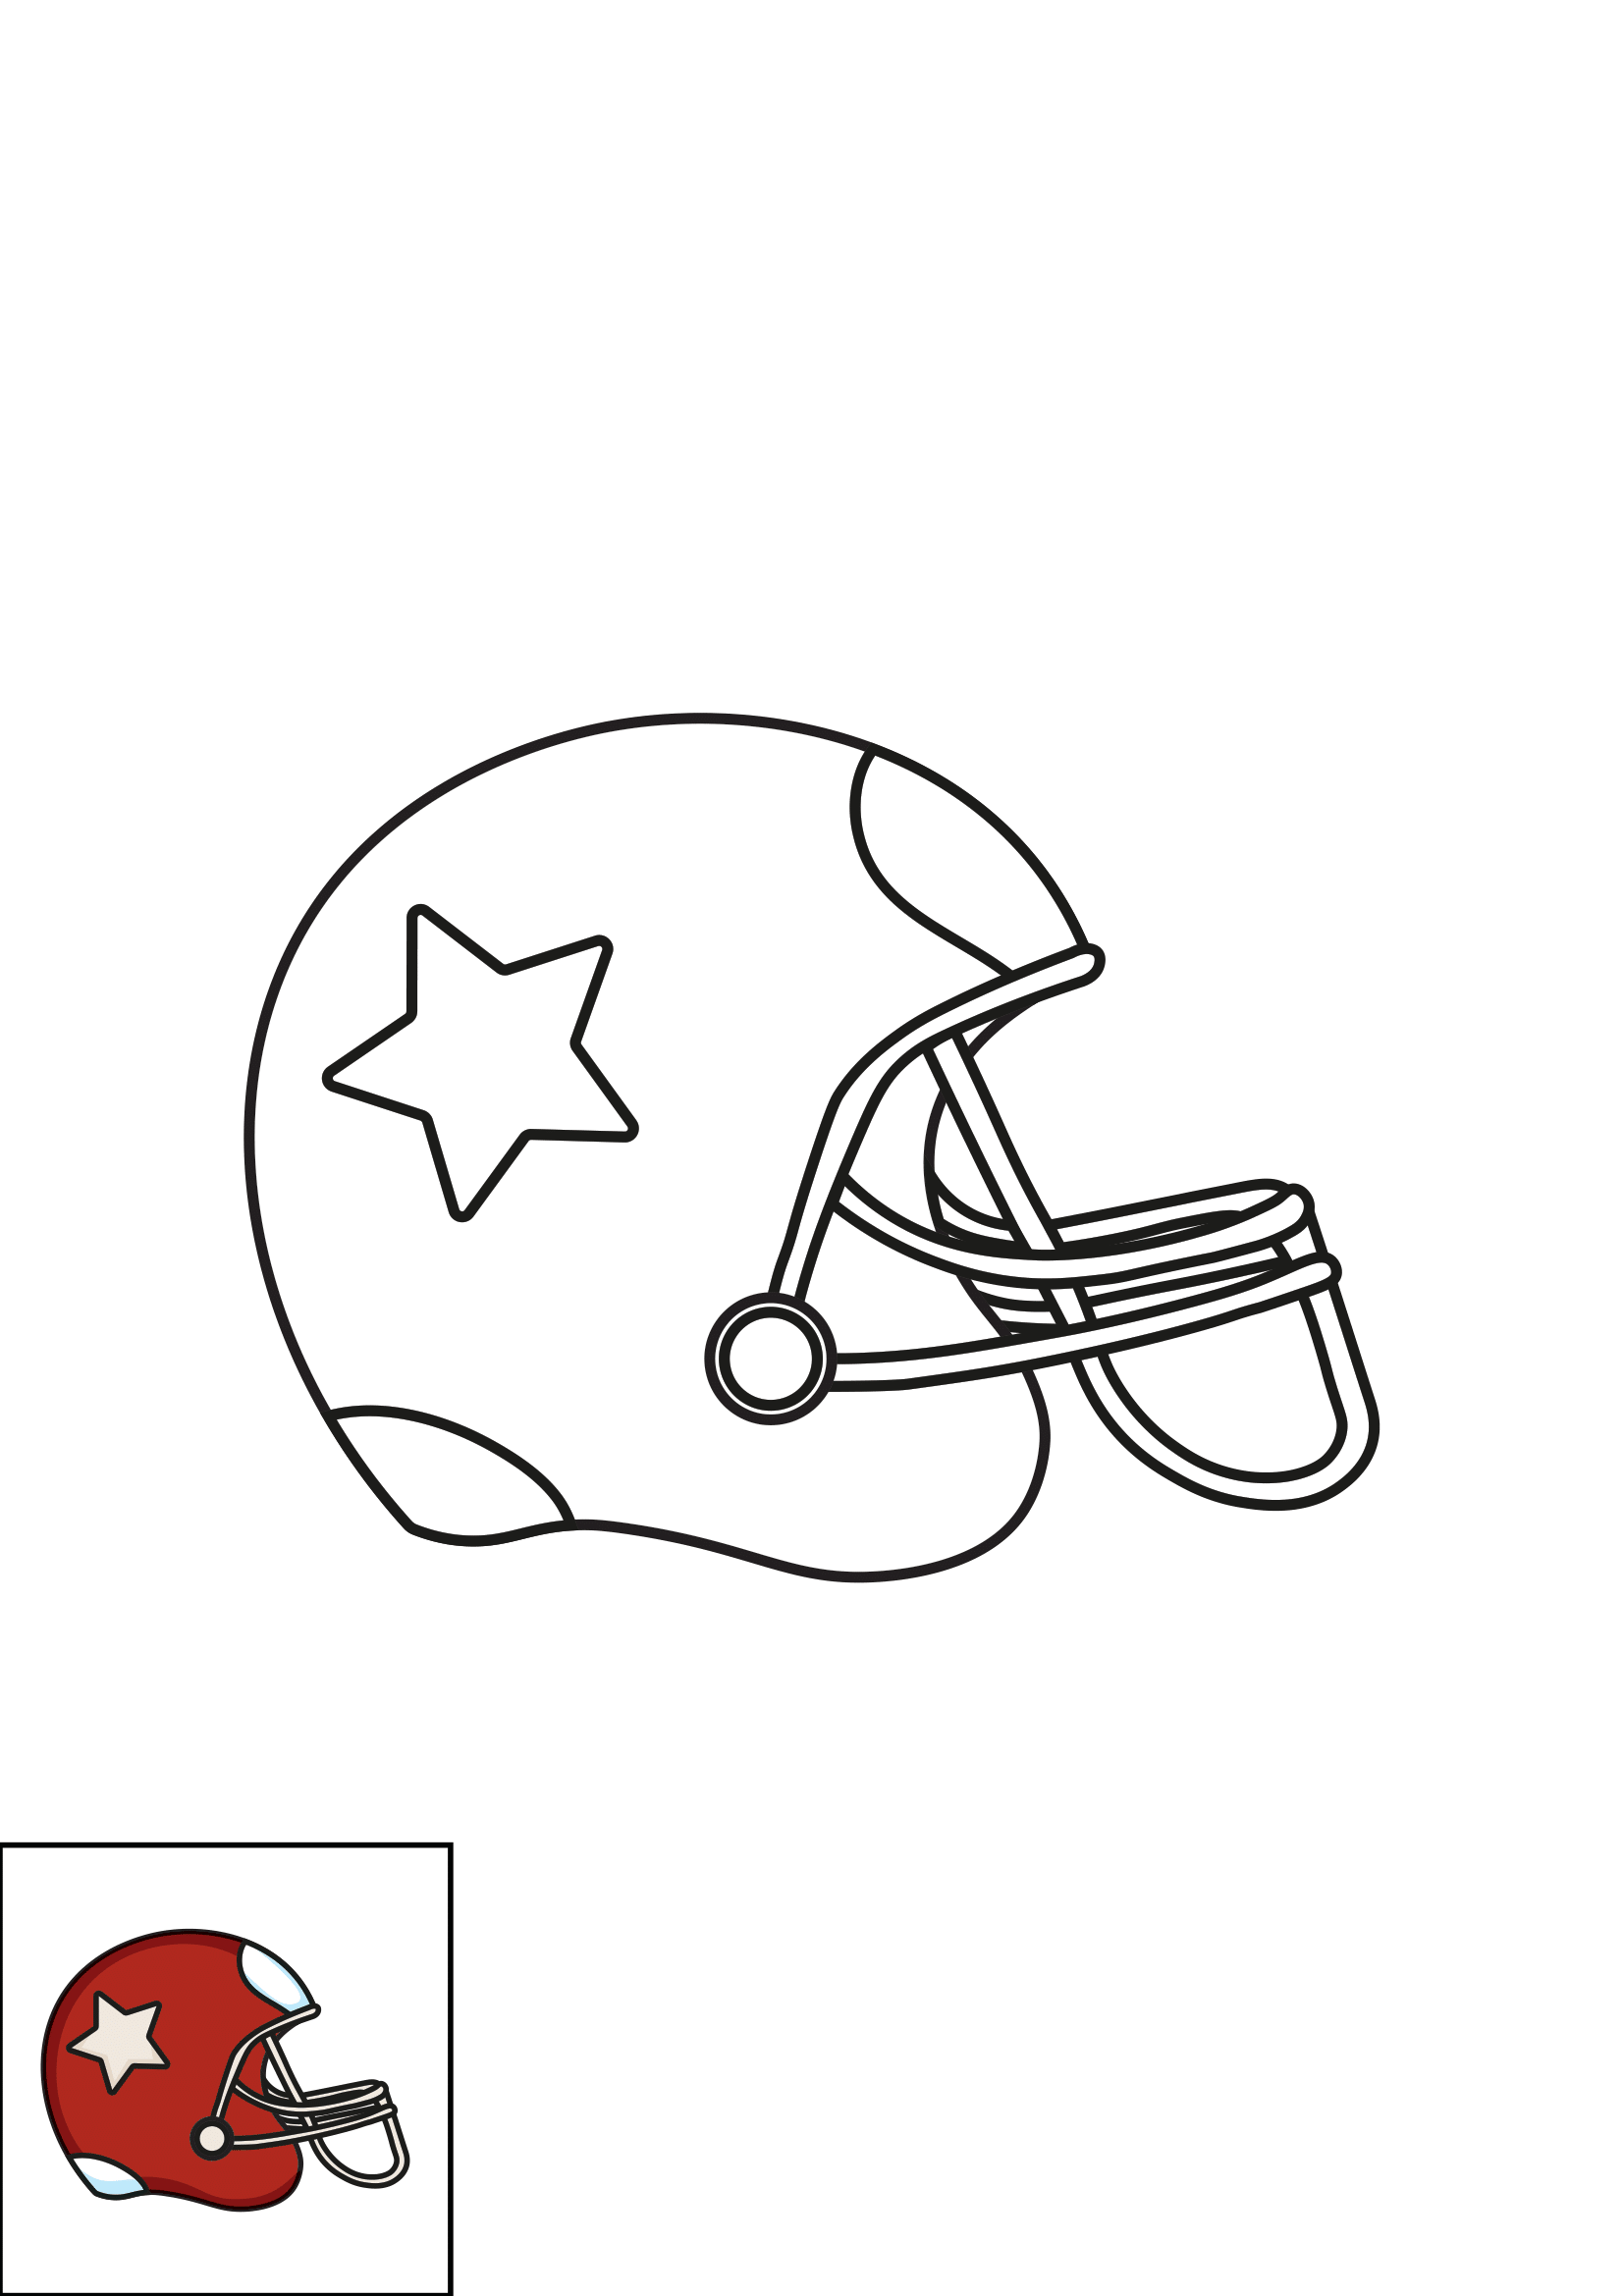 How to Draw A Football Helmet Step by Step Printable Color